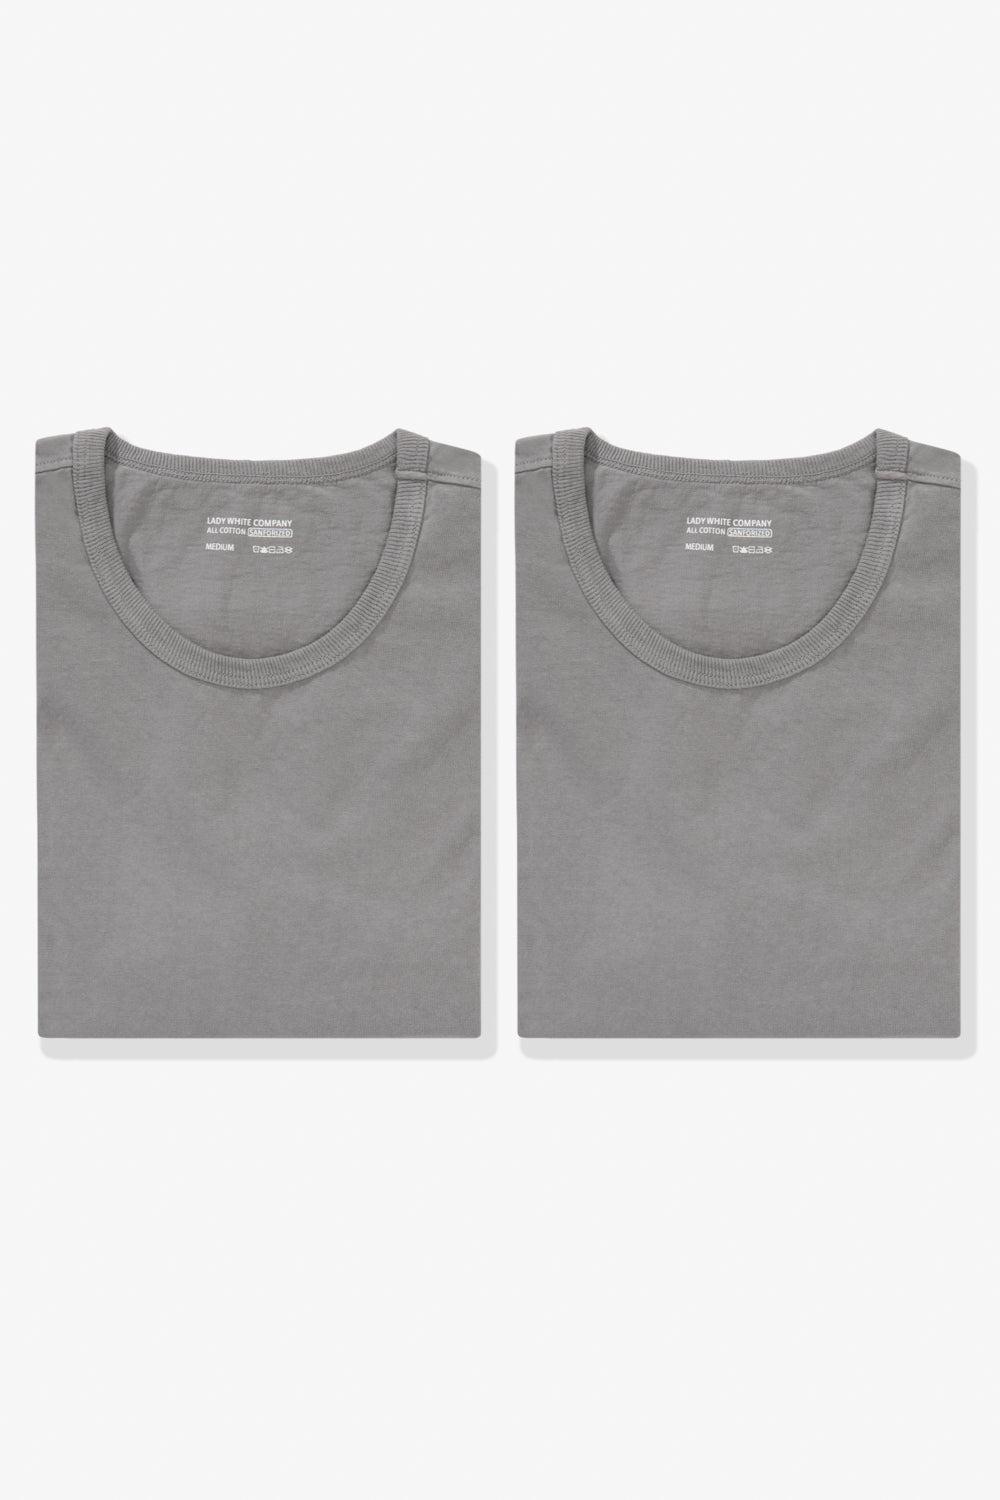 Refinement Høring spids T-SHIRT 2-PACK - TRUE GREY – LADY WHITE CO.